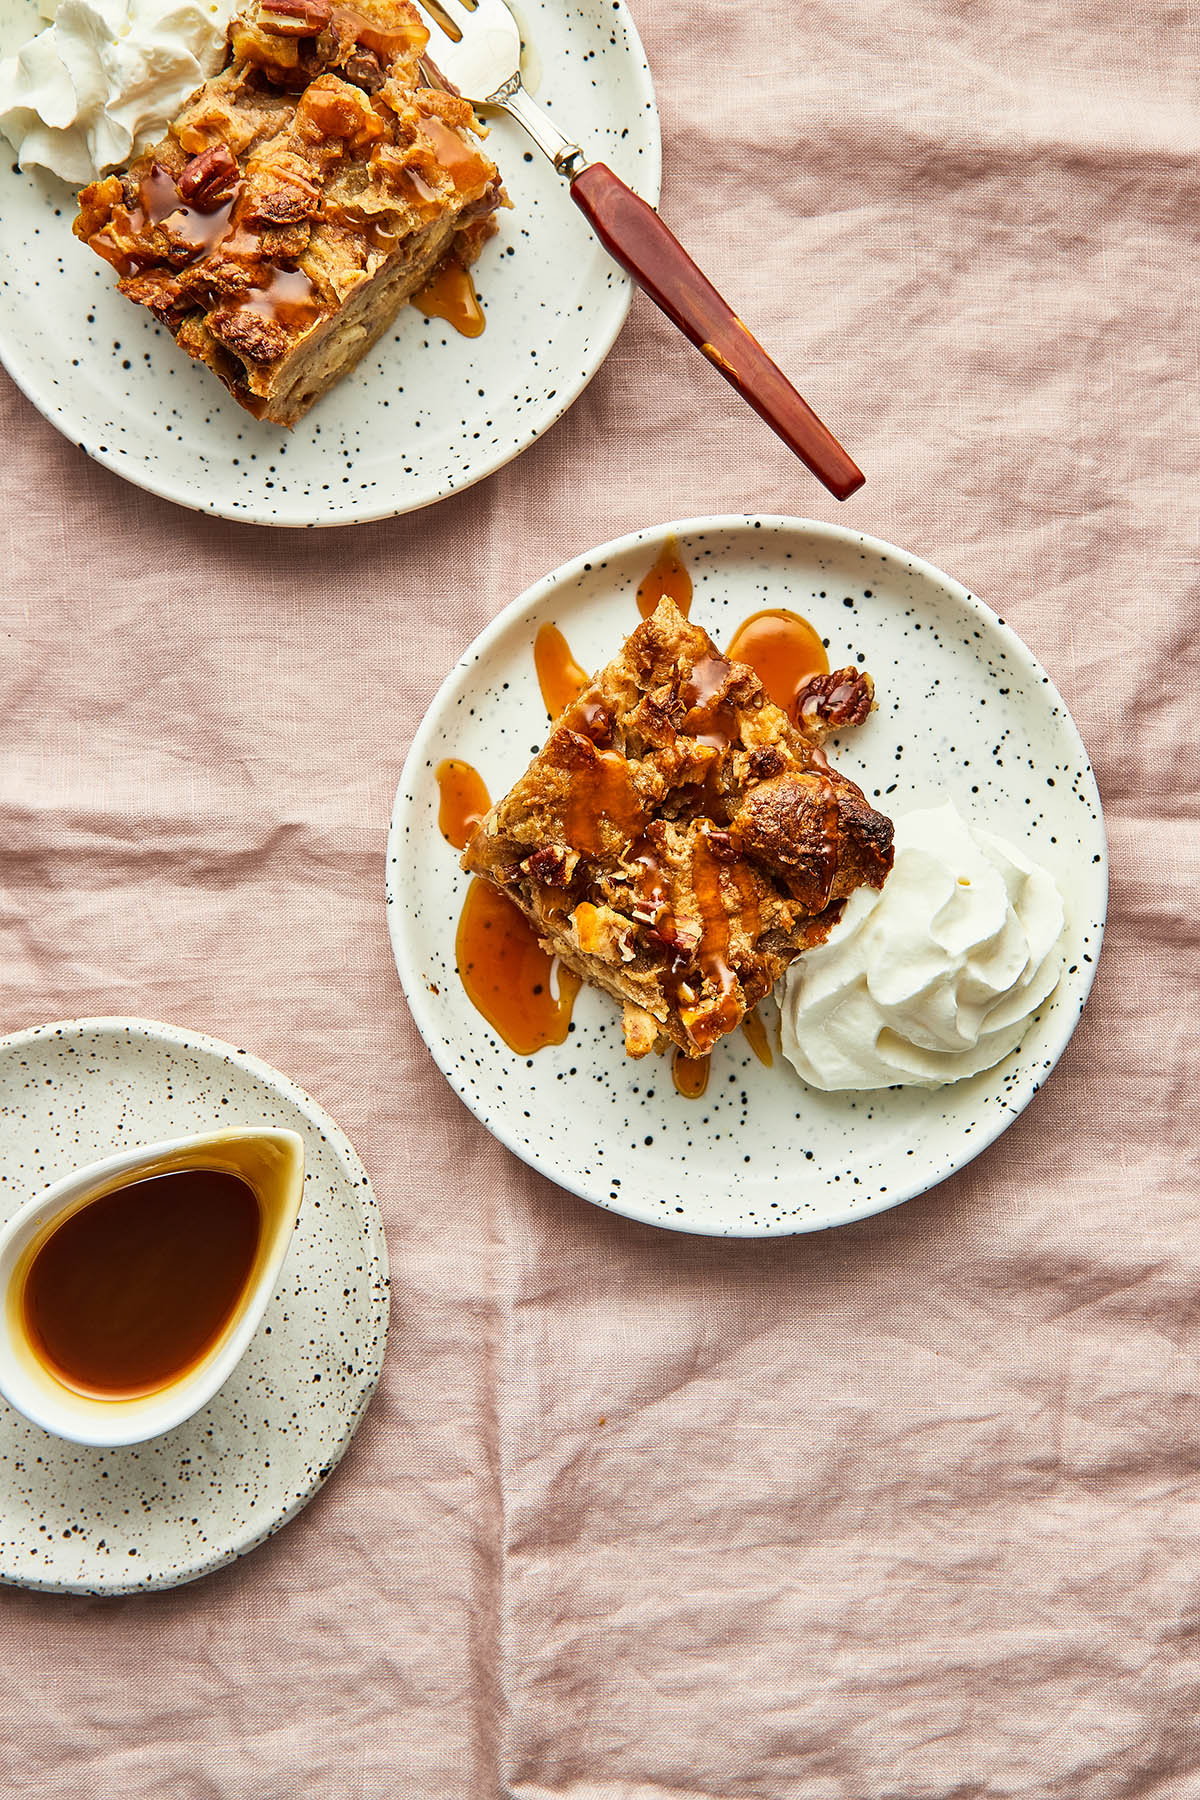 Two small plates of croissant bread pudding with whipped cream and caramel sauce.